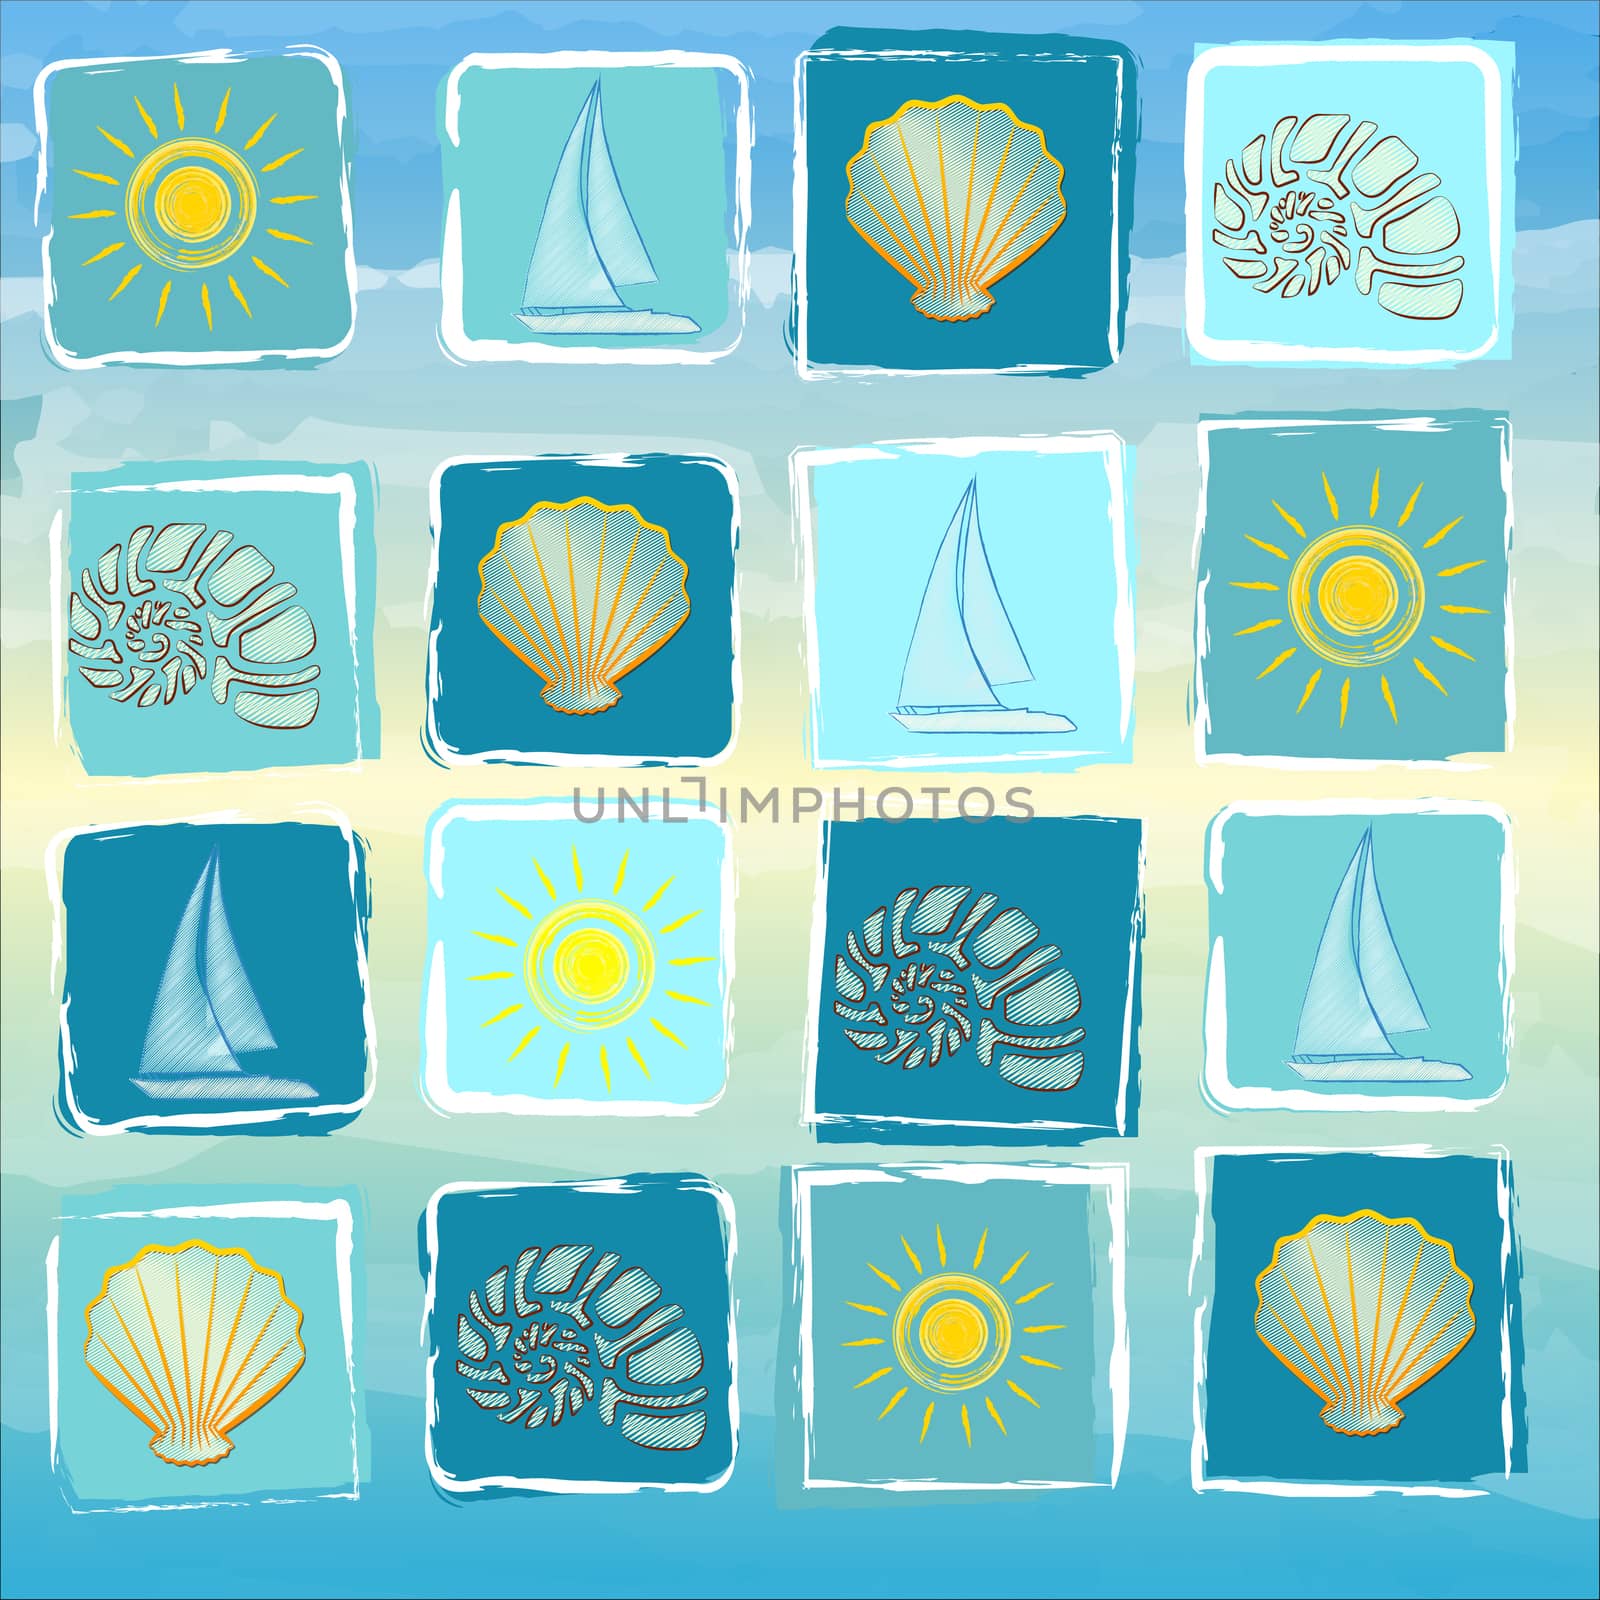 abstract blue summer background with drawn yellow suns, boats, shells, scallops and conchs in squares